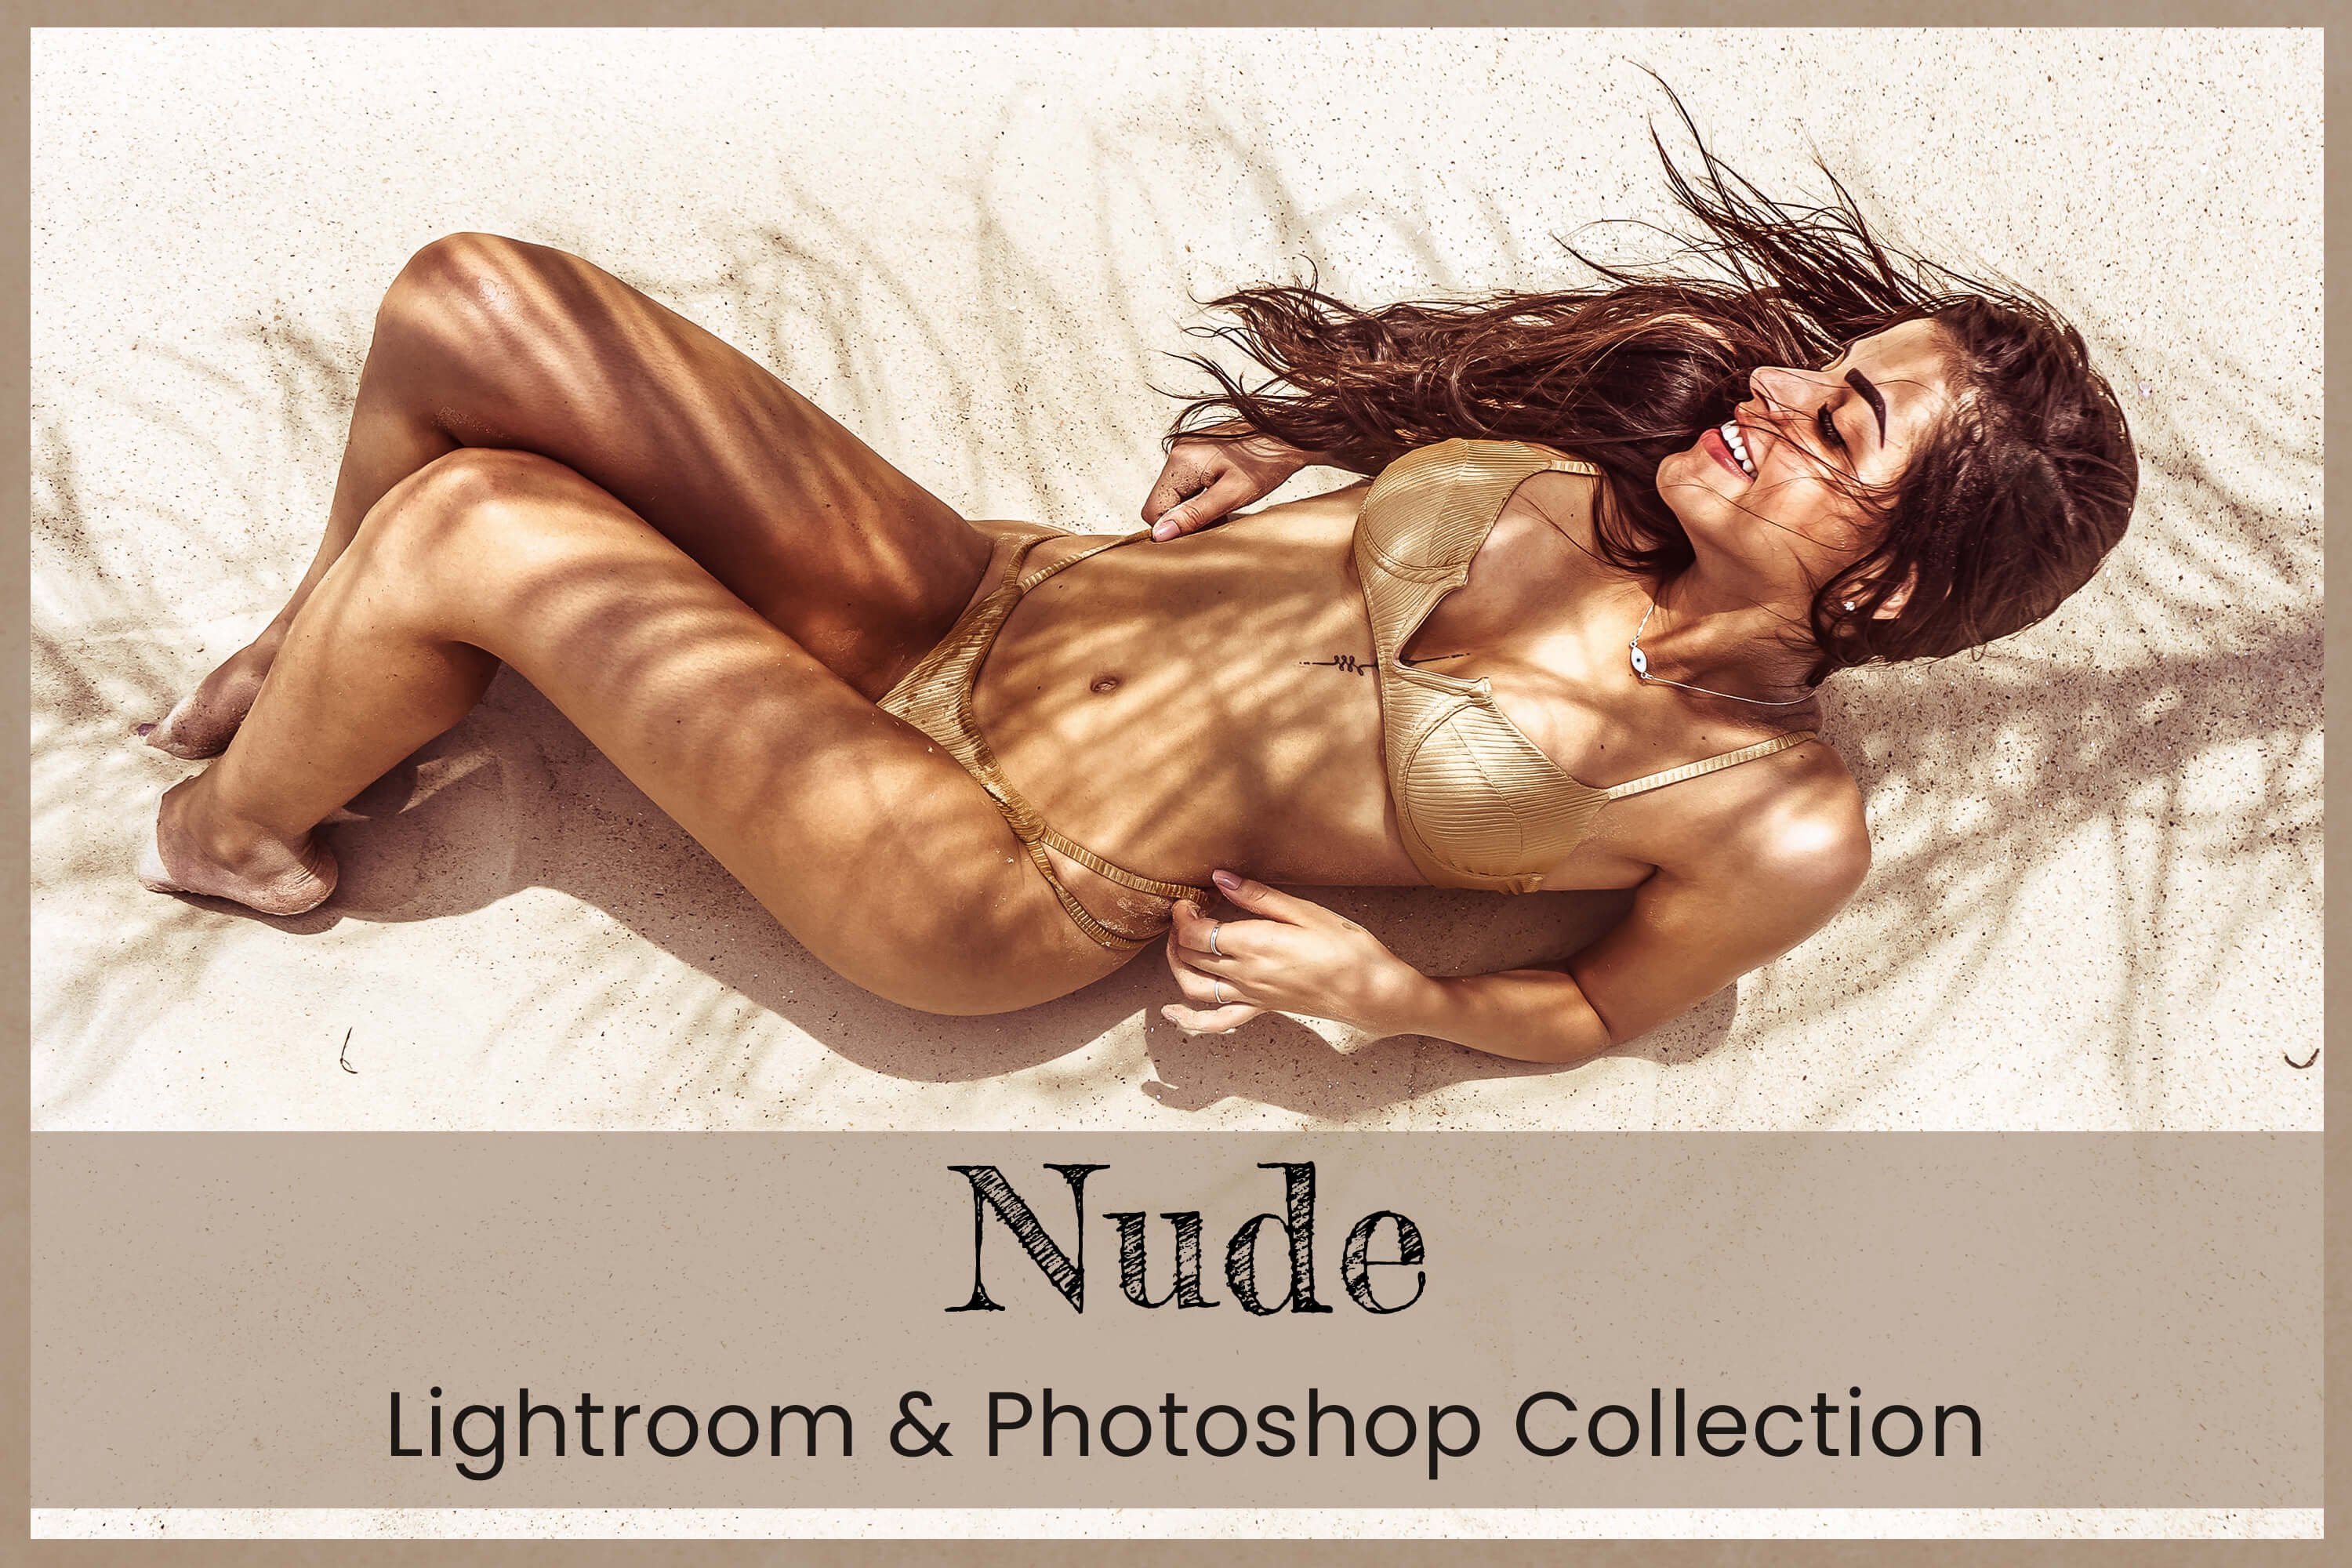 How to photoshop nudes